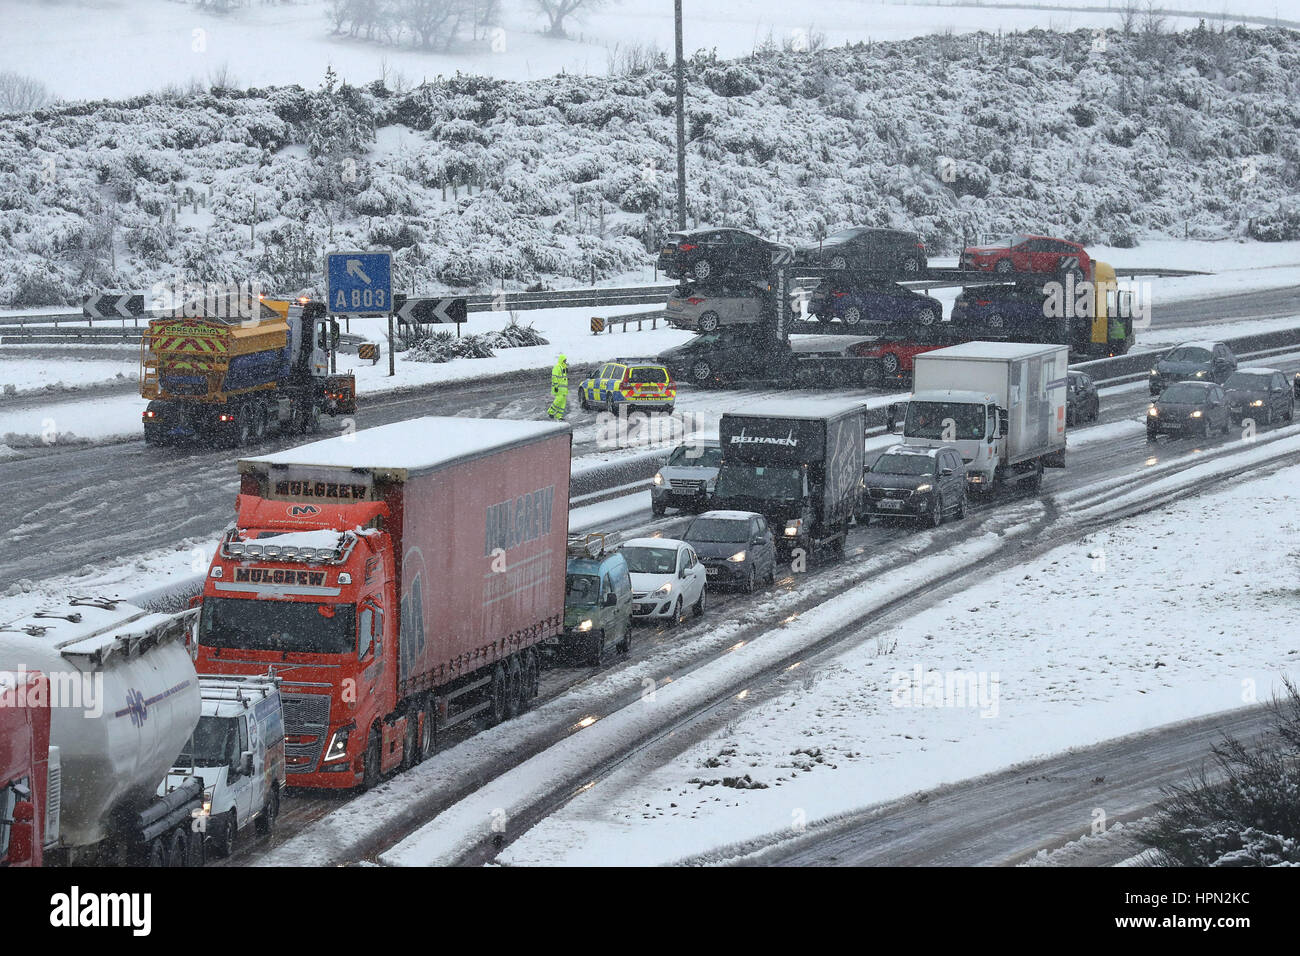 A jack-knifed car transporter on the M80 near Banknock during early morning snowfall, as flights have been cancelled and commuters were warned they faced delays after Storm Doris reached nearly 90mph on its way to batter Britain. Stock Photo